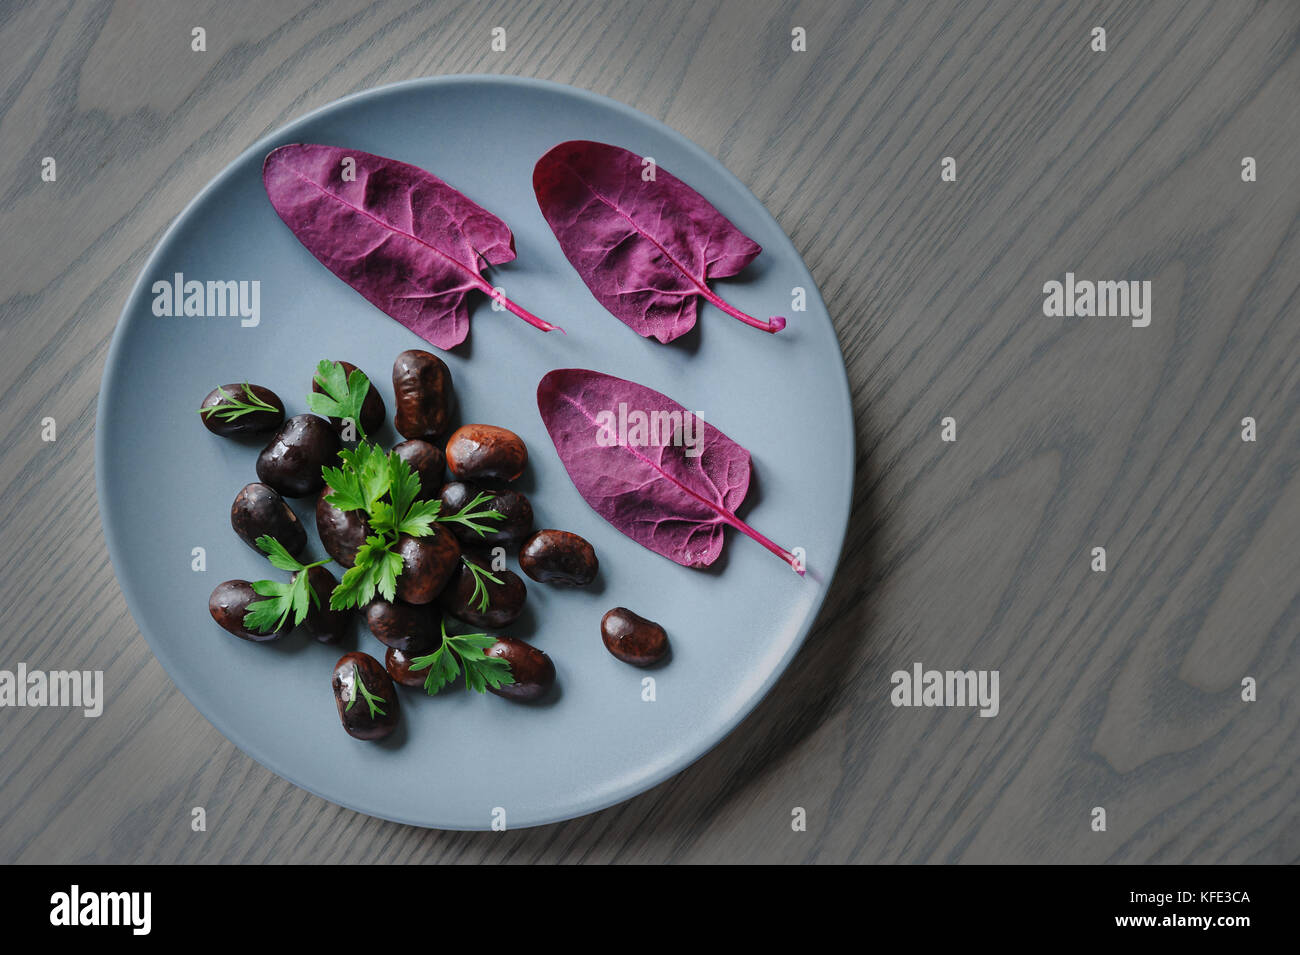 Plate with dark  beans and red spinach leaves placed on wooden table top. Stock Photo